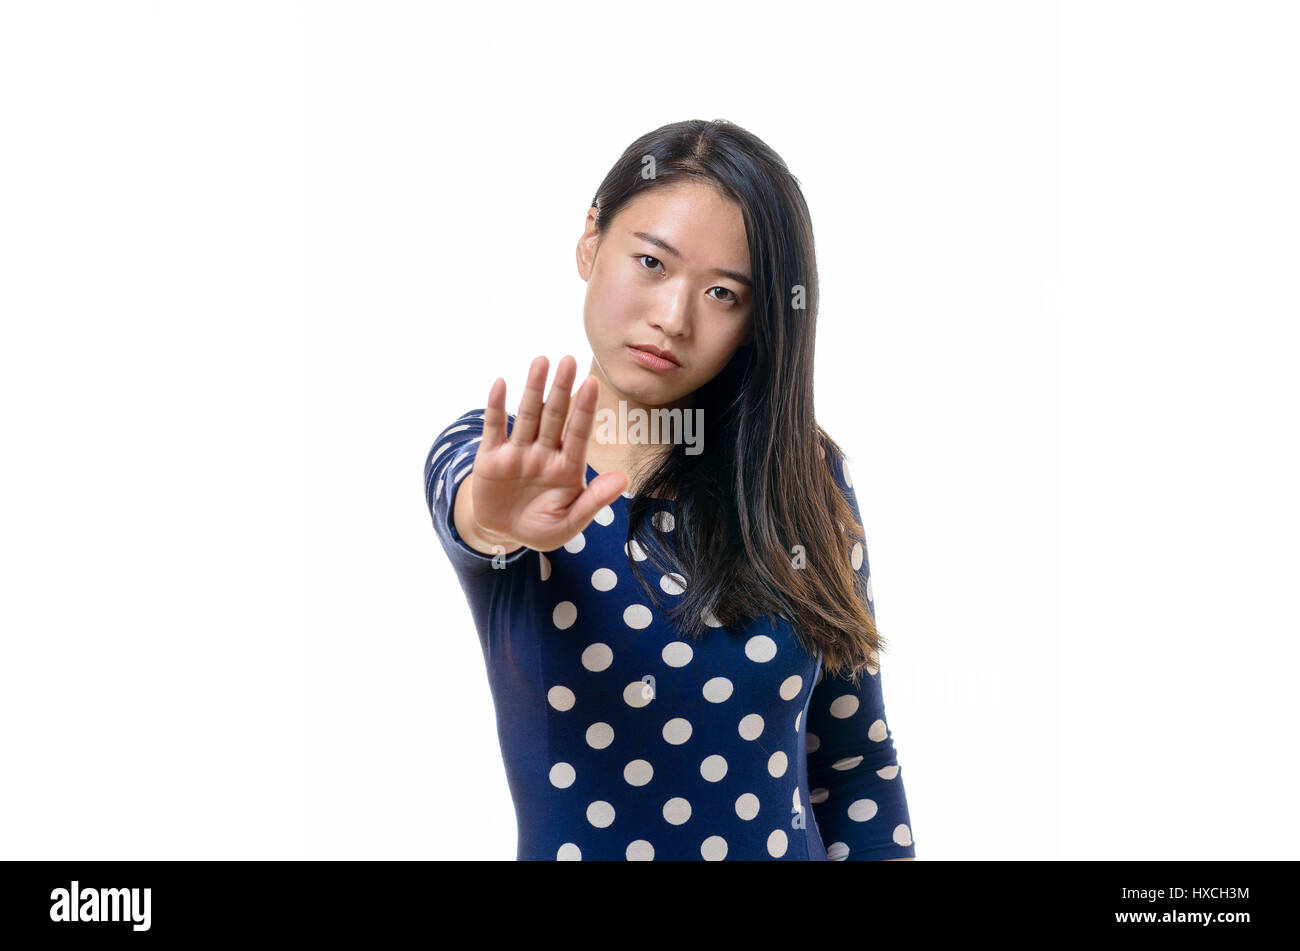 Angry stern young Chinese woman making a halt, enough or go away gesture with the palm of her hand, upper body isolated on white Stock Photo